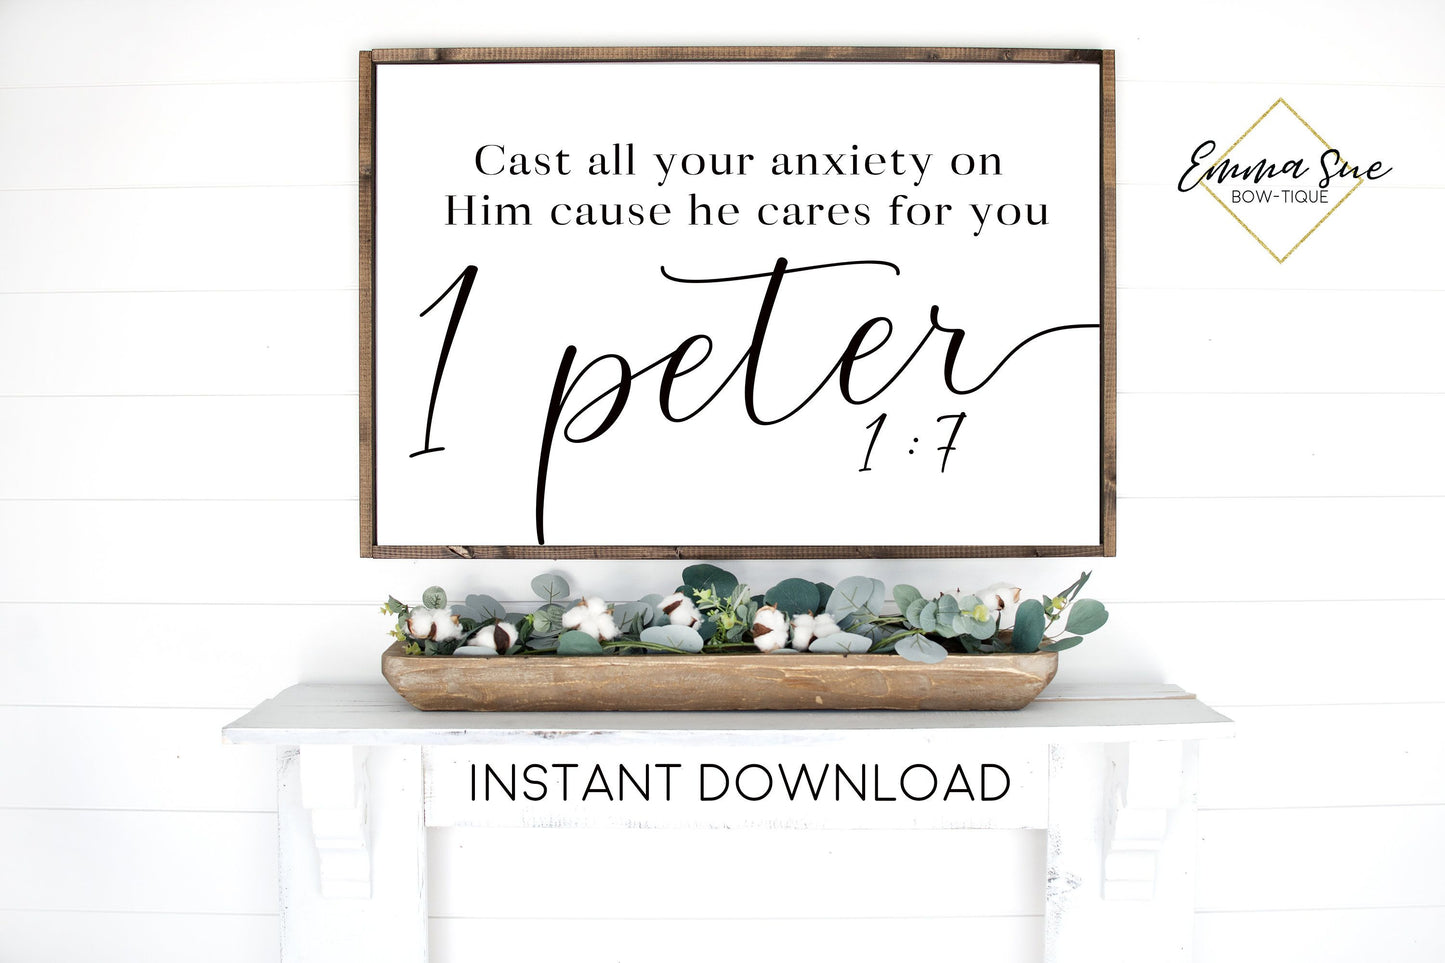 Cast all your anxiety on Him cause he cares for you 1 Peter 1:7 Bible Verse Printable Sign Wall Art